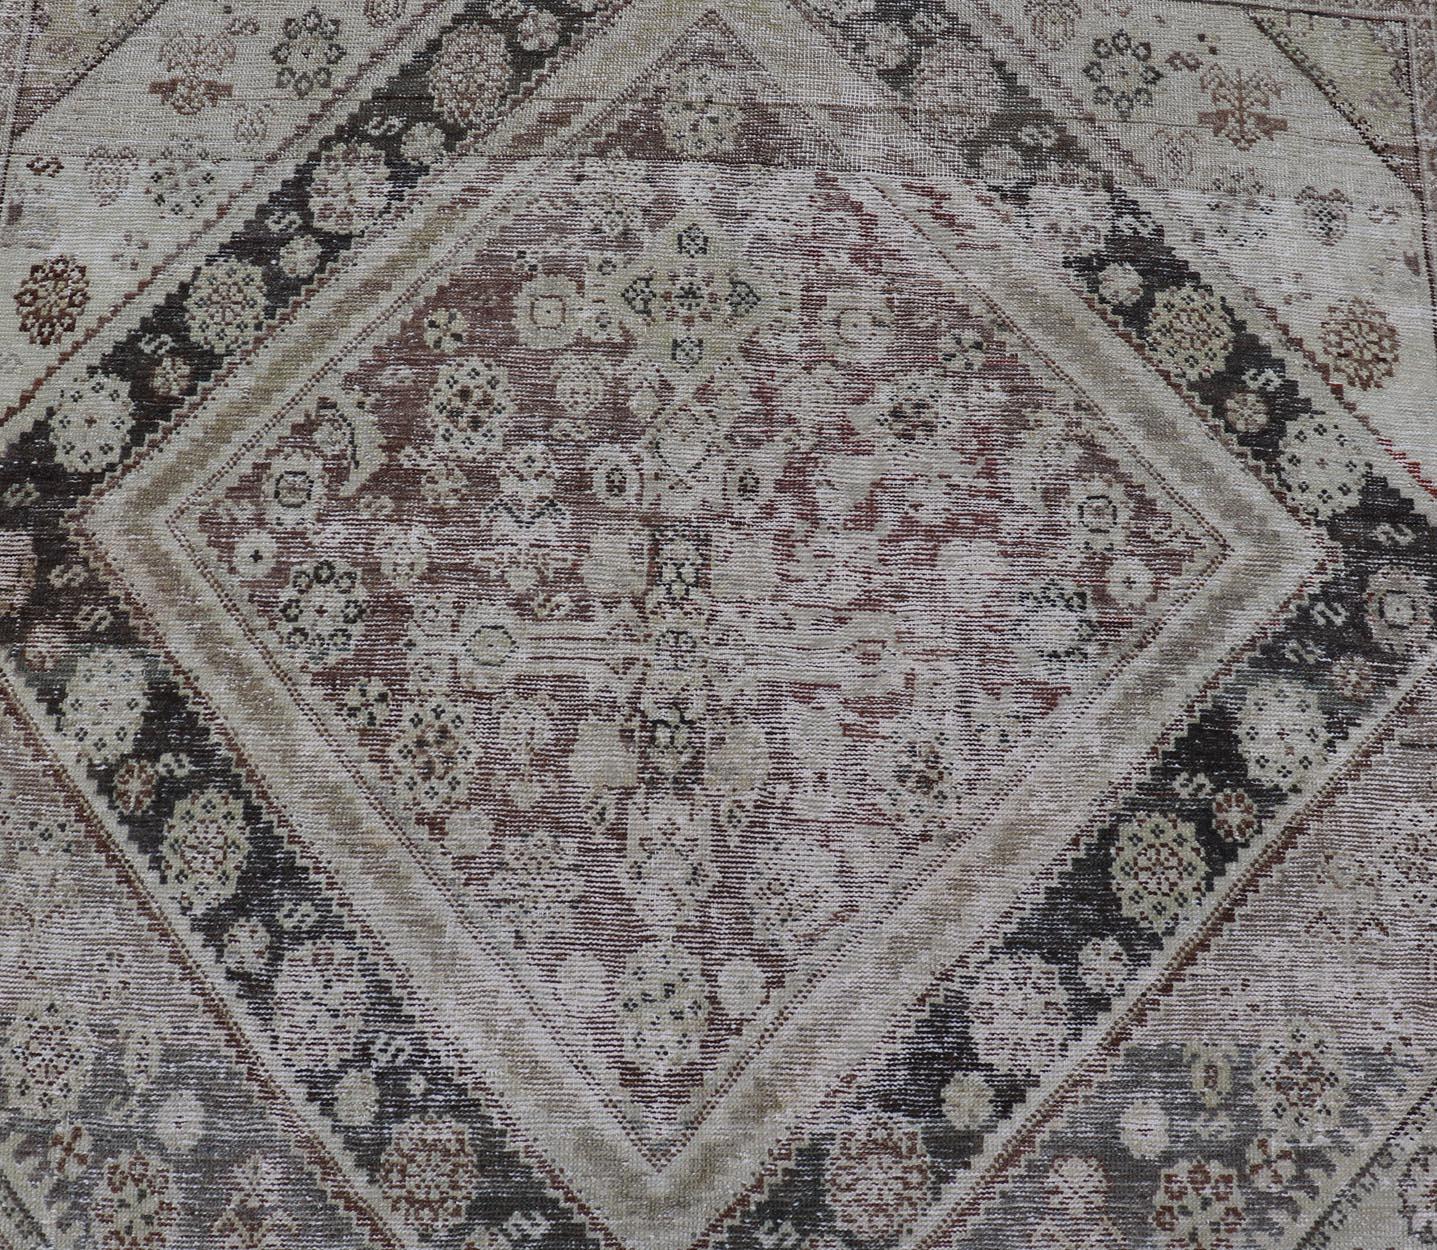 Antique Persian Mahal Gallery Rug with Medallion Design in Cream and Browns For Sale 8